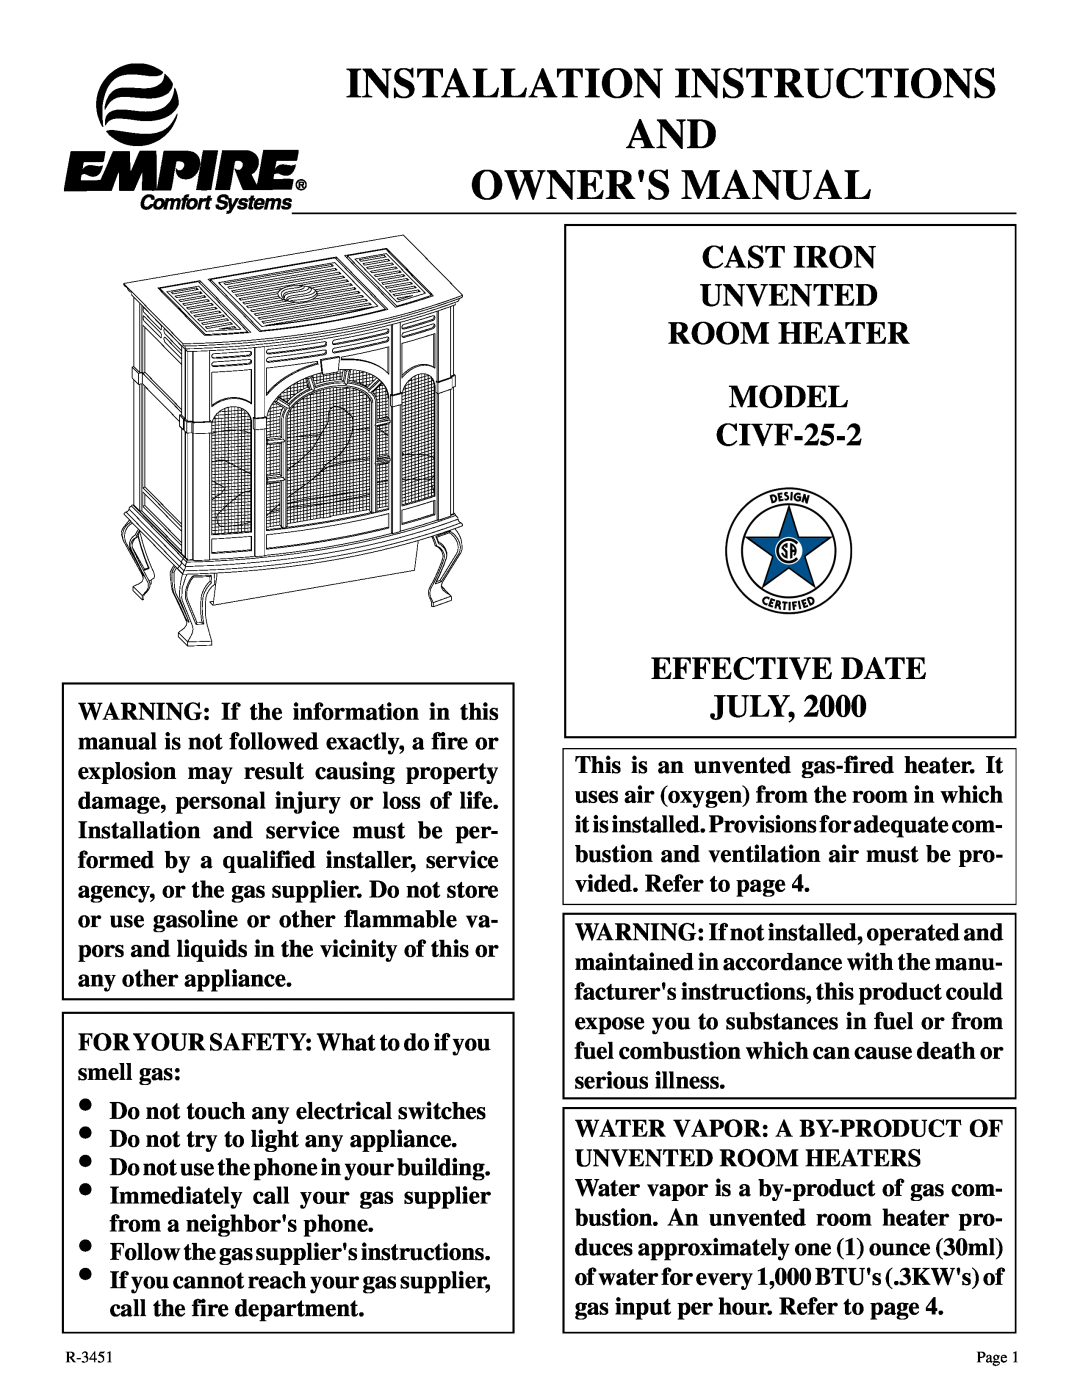 Empire Comfort Systems installation instructions CAST IRON UNVENTED ROOM HEATER MODEL CIVF-25-2, Effective Date July 